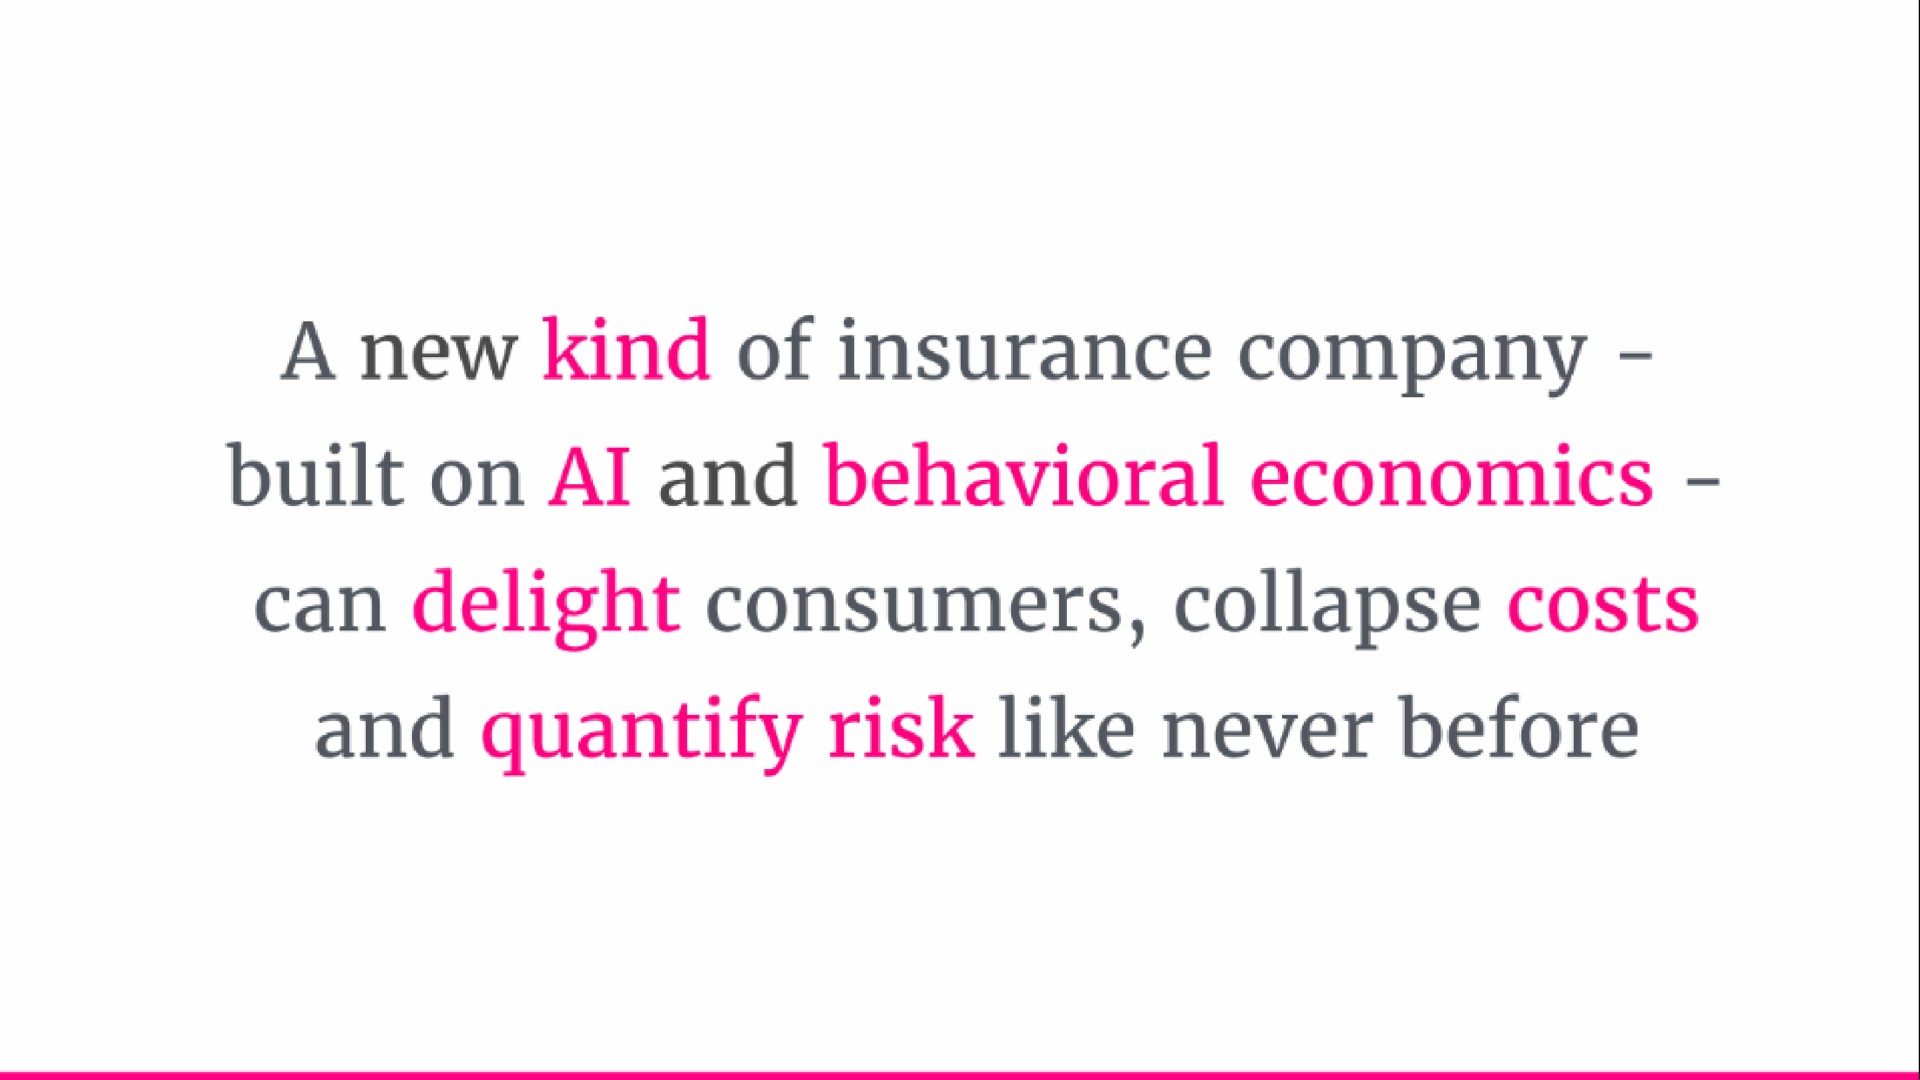 a new kind of insurance company built on and behavioral economics can delight consumers collapse costs and quantify risk like never before | Lemonade